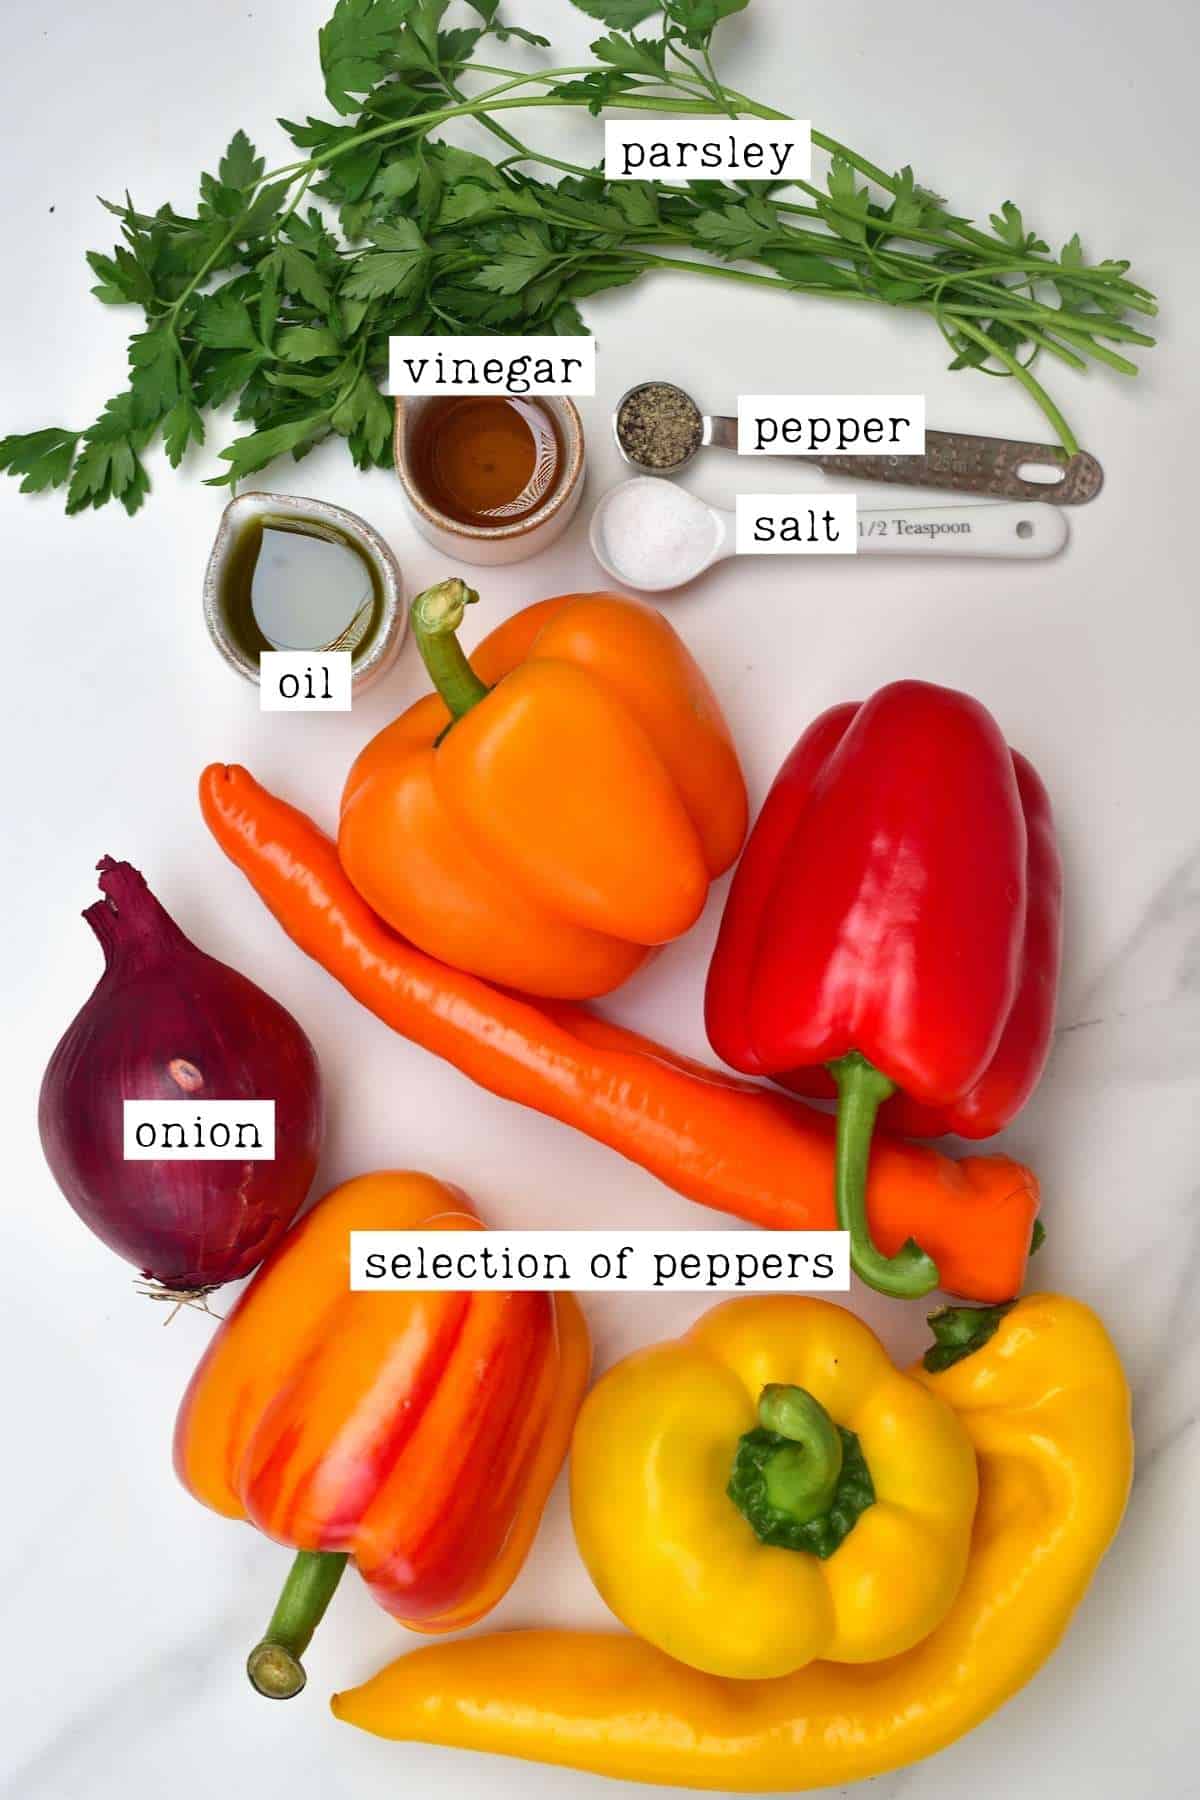 Ingredients for roasted red pepper